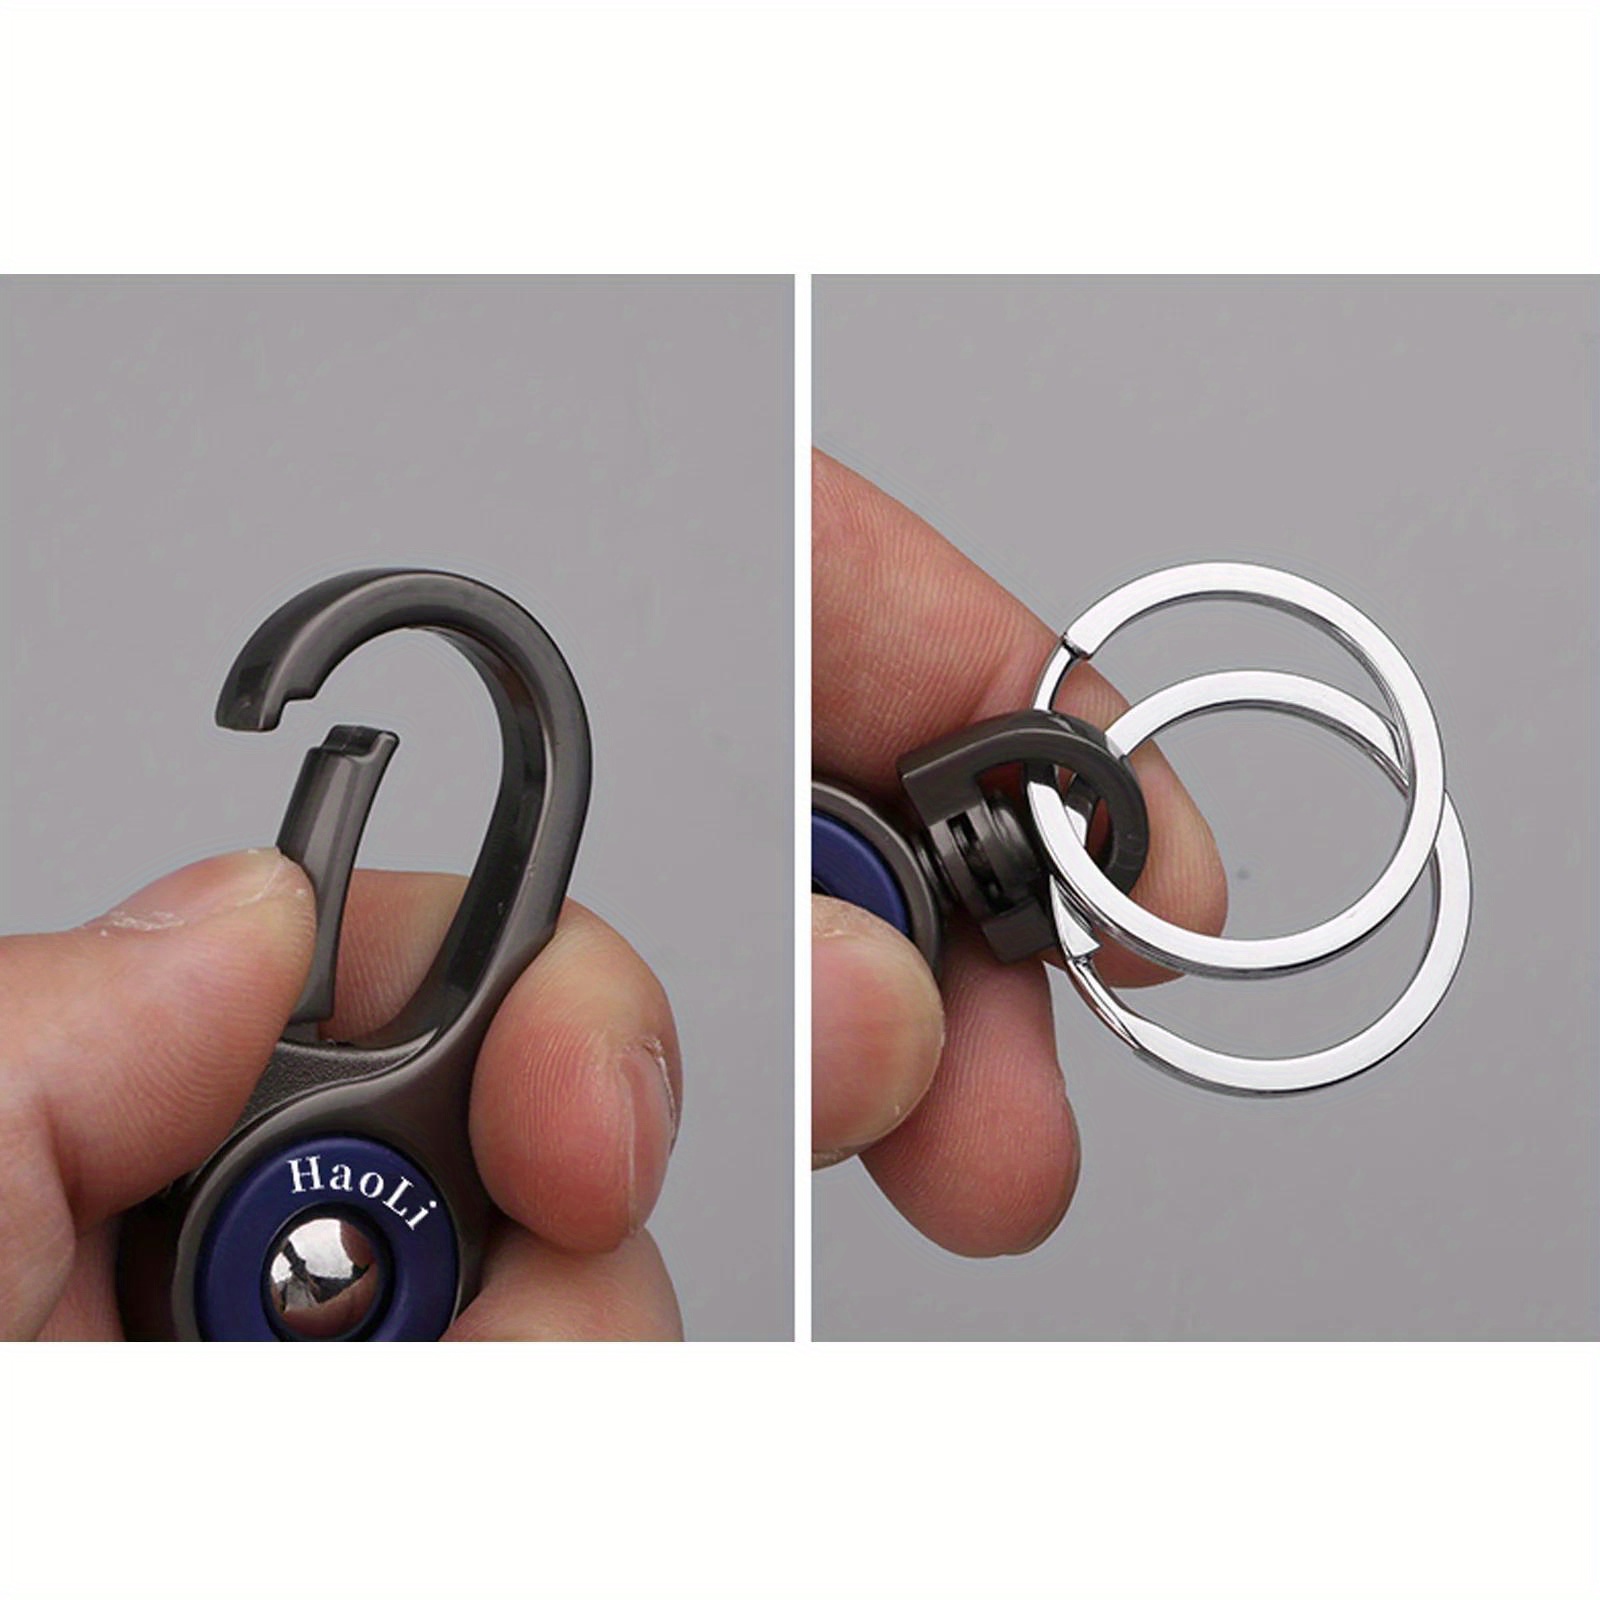 Titanium Alloy Multifunction Car Outdoor Camp Keychain Carabiner Key Chain  Ring